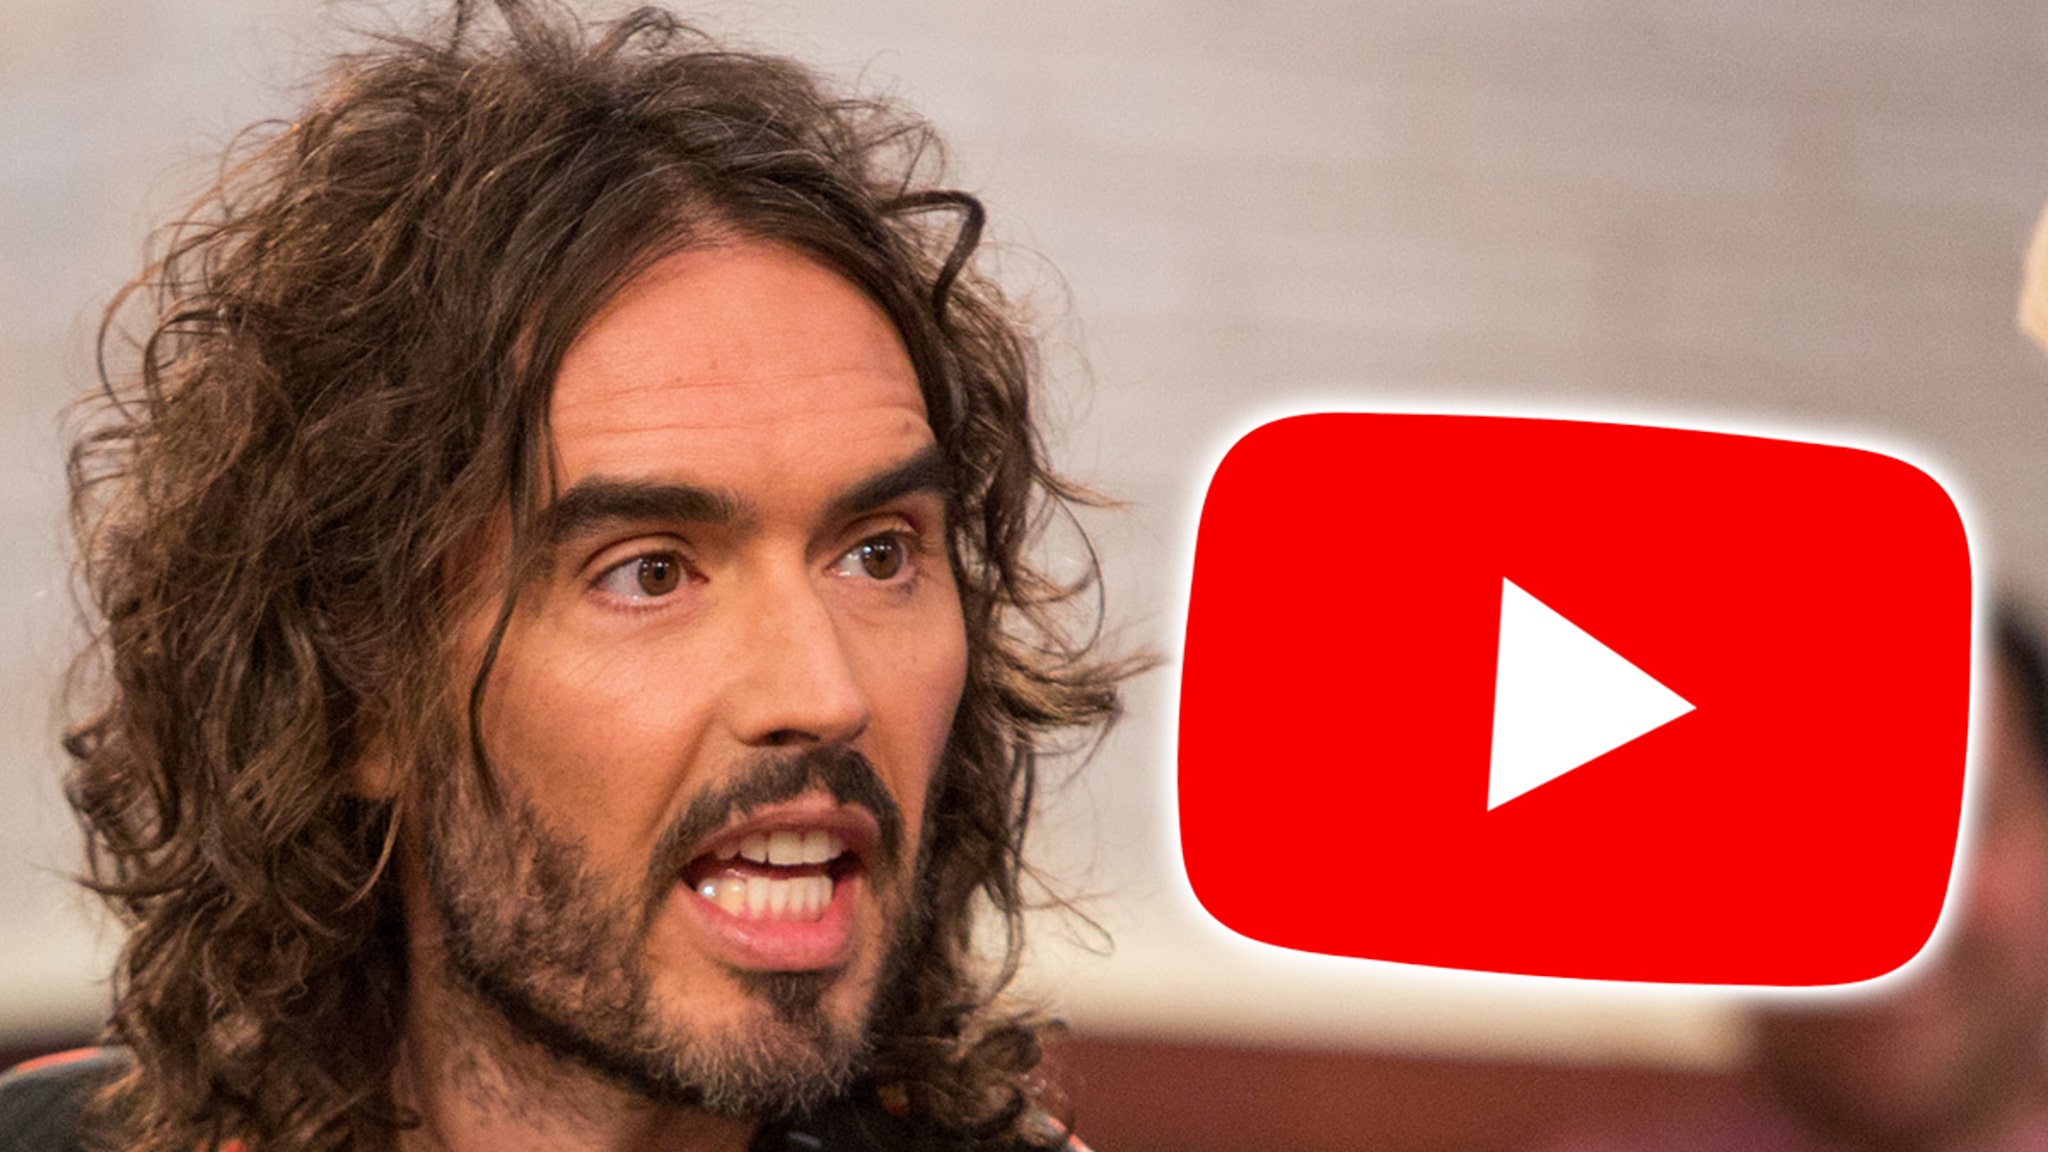 Russell Brand Blocked From Monetizing YouTube Videos Amid Rape Allegations